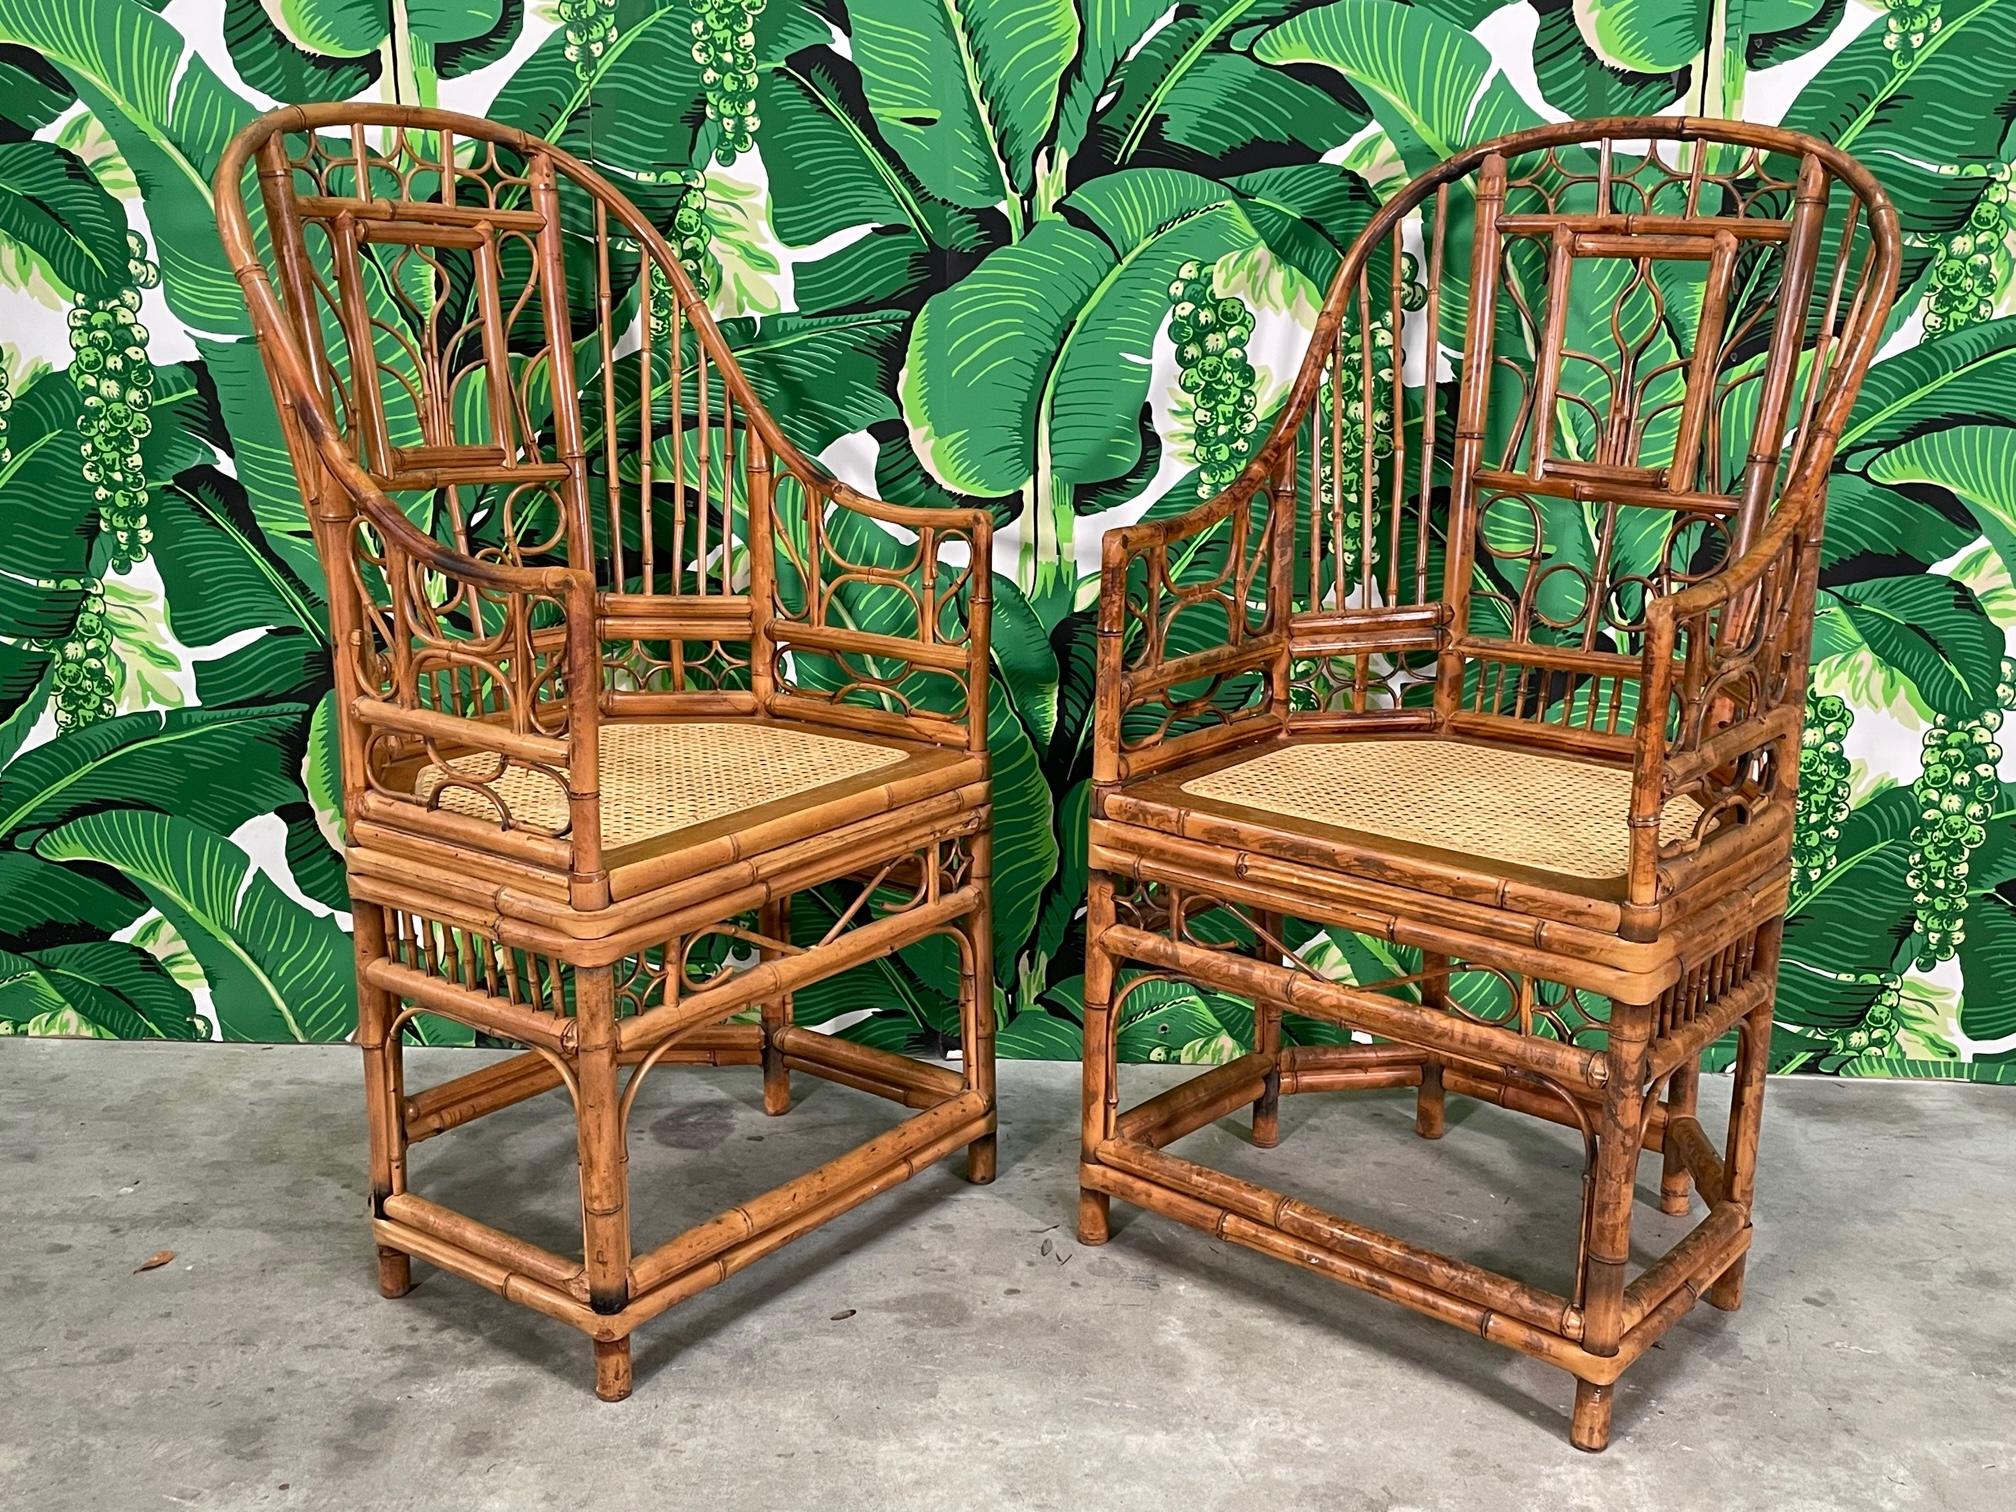 Pair of tortoise bamboo Brighton Pavilion style arm chairs feature cane seats and intricate fretwork in geometric and foliate motifs. Would work well in safari, chinoiserie, boho, and just about any decor style. Good condition with minor